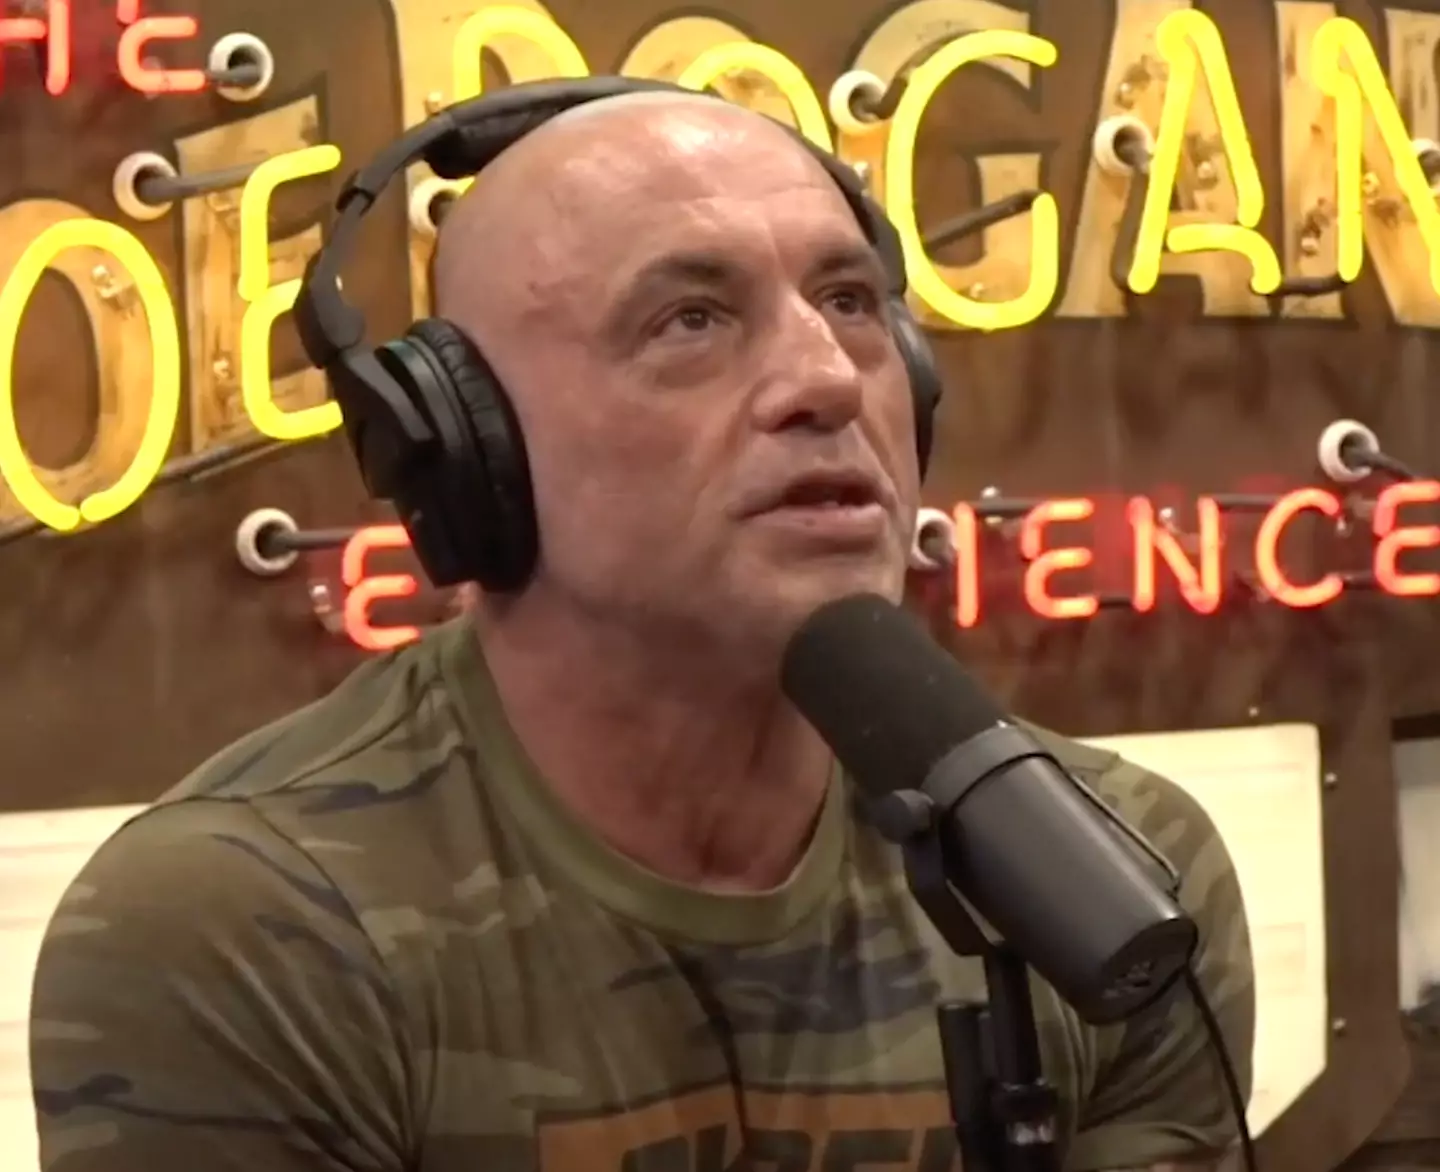 Joe Rogan argued there are songs which are 'infinitely worse'.